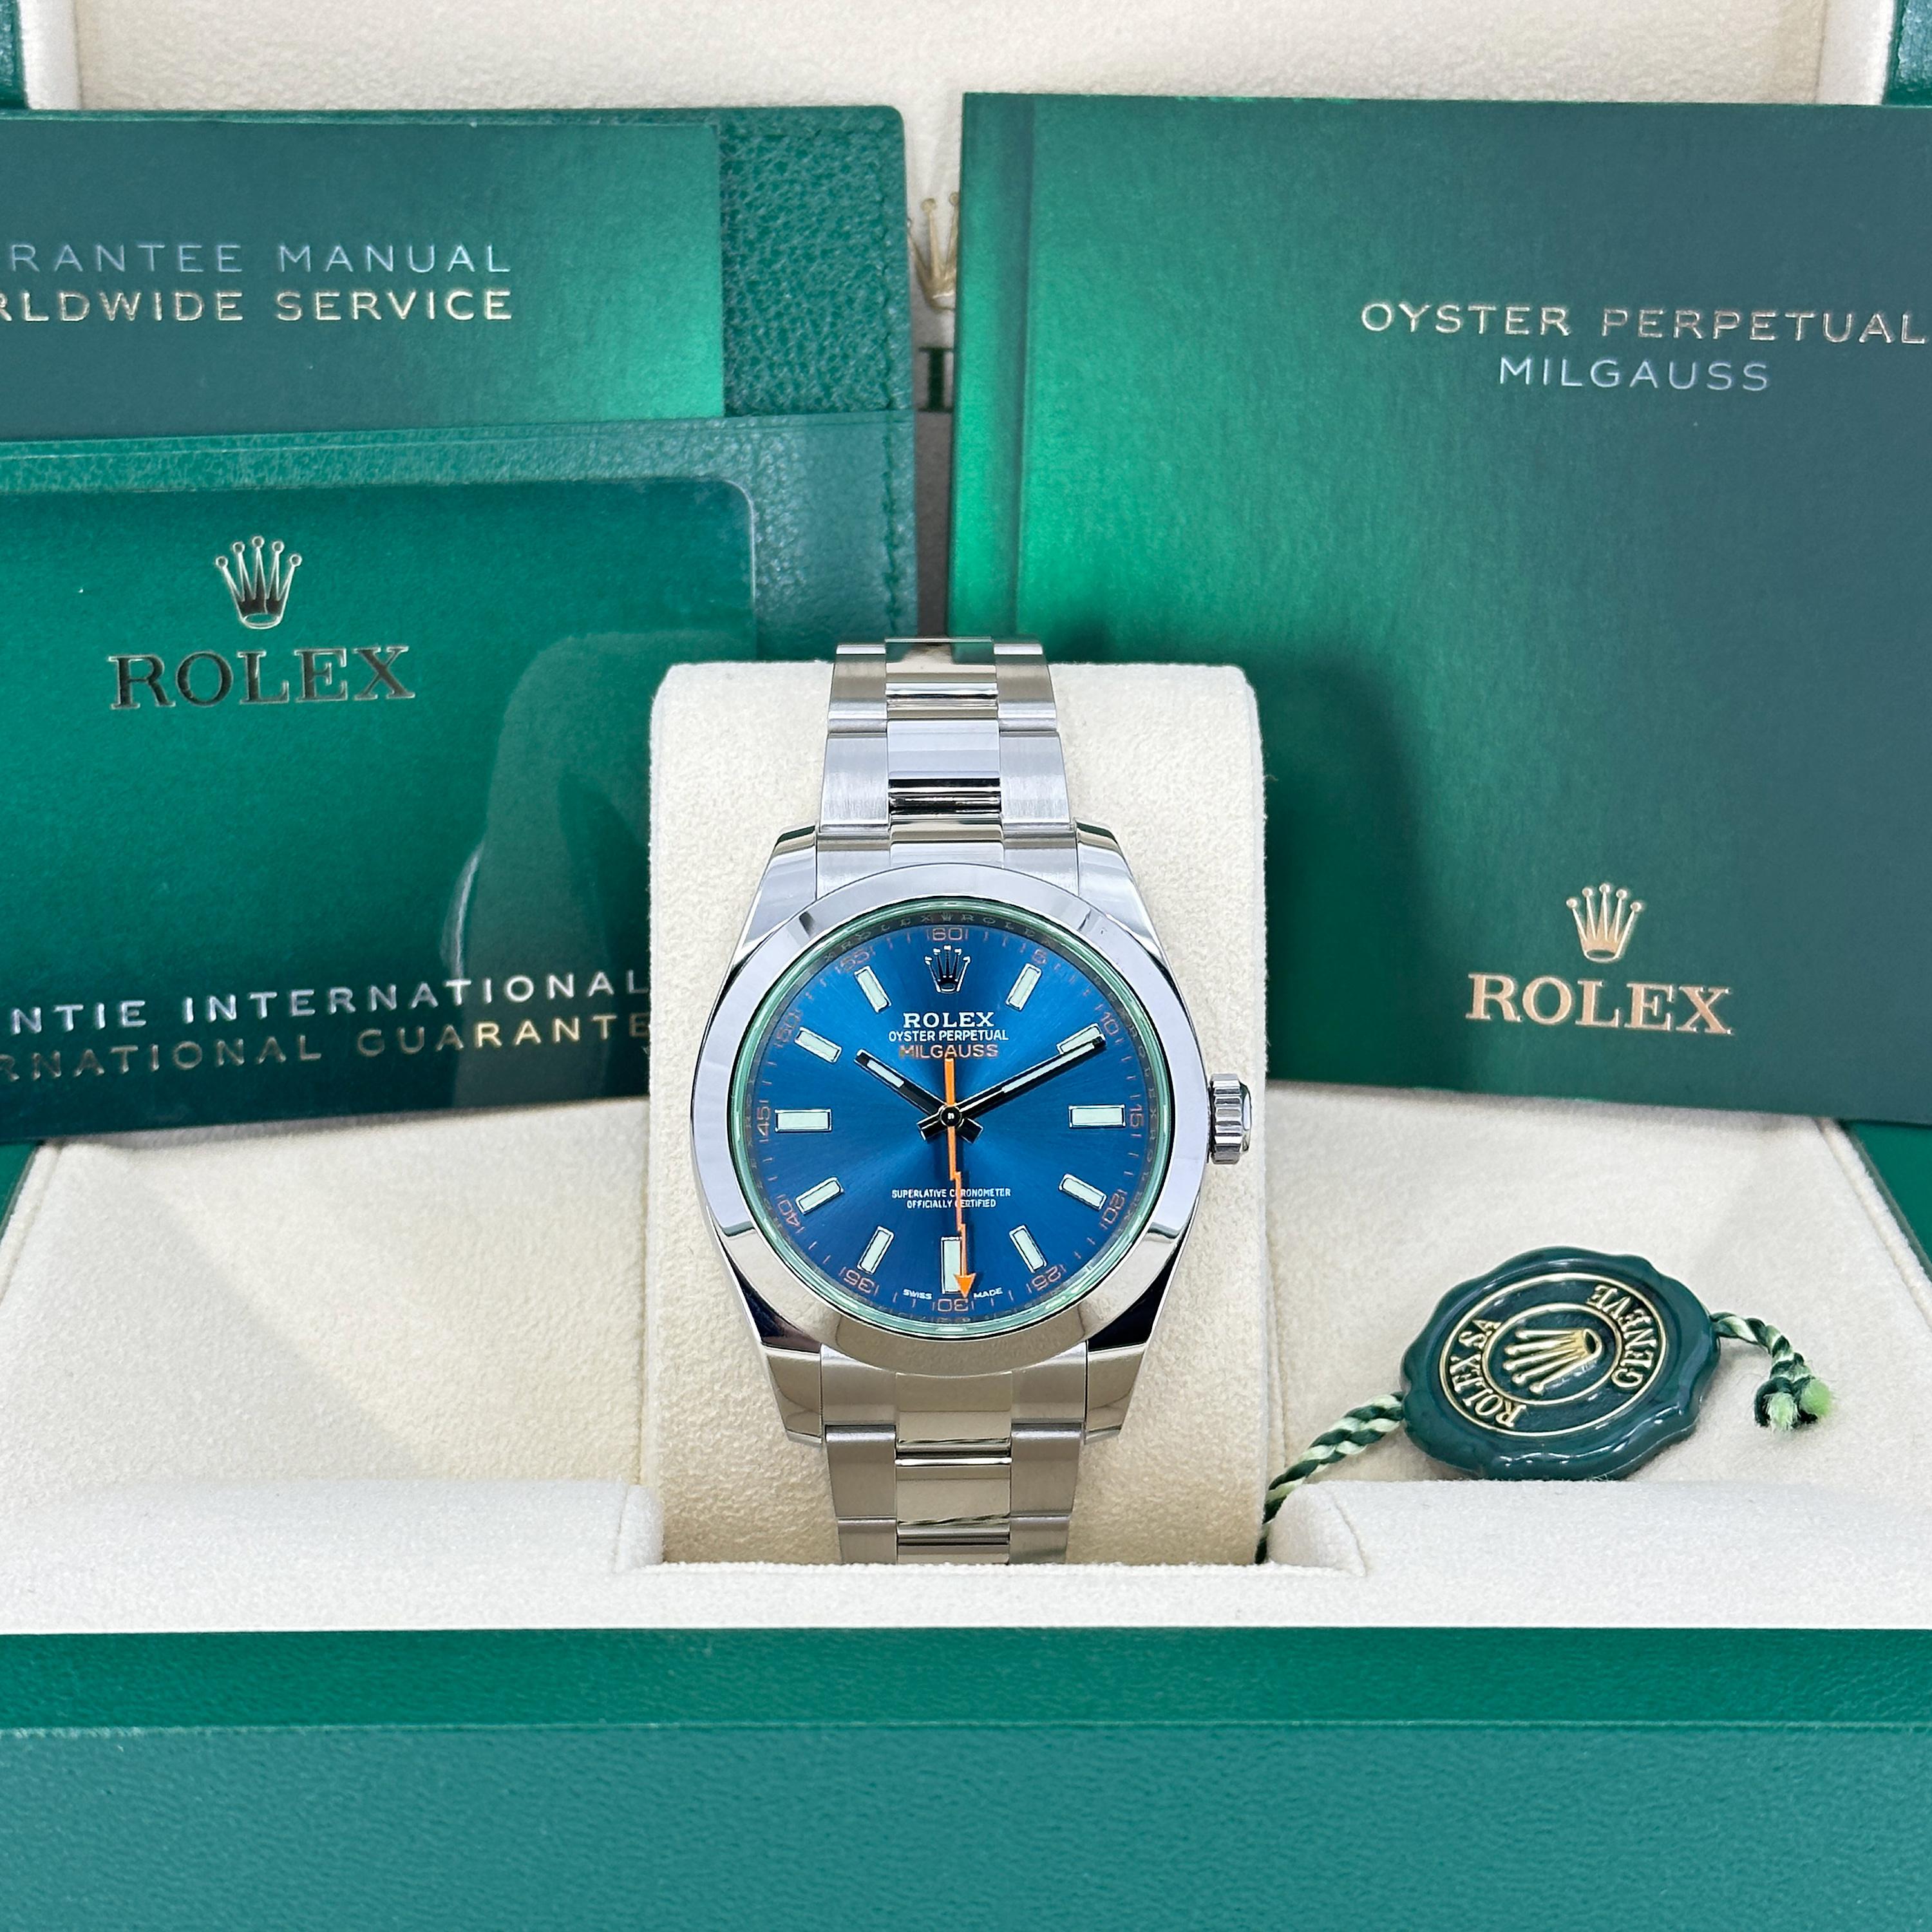 Unworn Professional watches Rolex Milgauss 40, Oystersteel, Ref# 116400GV-0002 - luxury, elegance, and practicality.
FULLY STICKERED, BOTH HANG-TAGS, OPEN CARD.

Make: Rolex
Model: Milgauss
Reference: 116400GV-0002
Diameter: 40 mm
Case material: